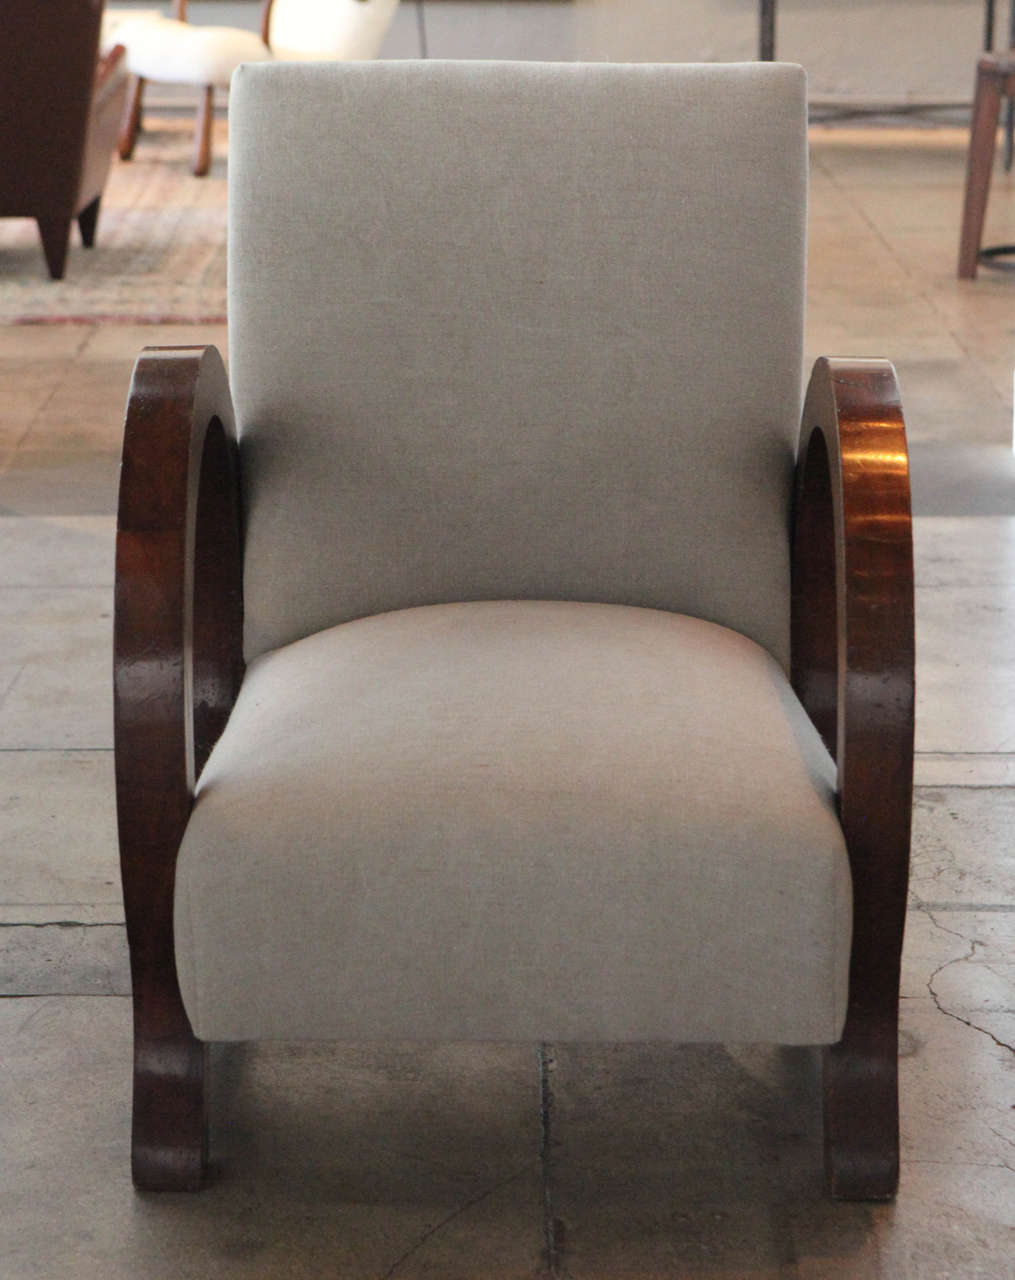 Reupholstered in Belgian linen, this Art Deco era chair is just the best.